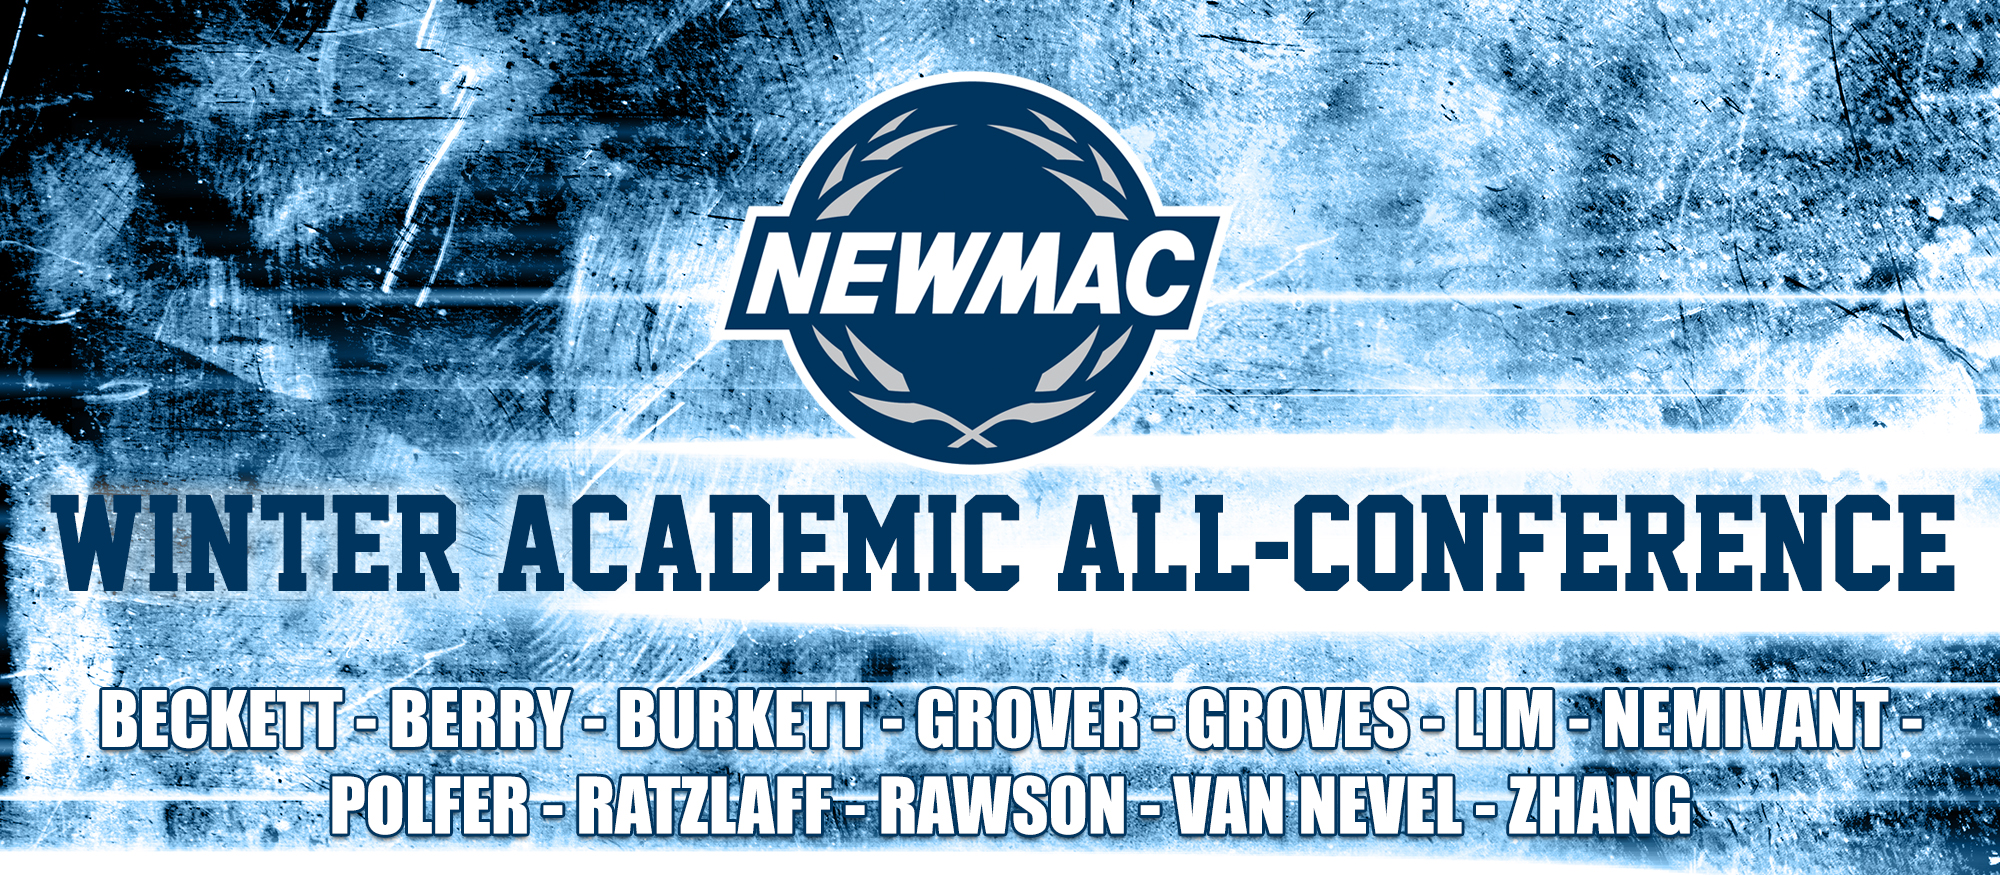 Graphic promoting the 2017-18 NEWMAC Winter Academic All-Conference selections from the sports of Basketball and Swimming & Diving.